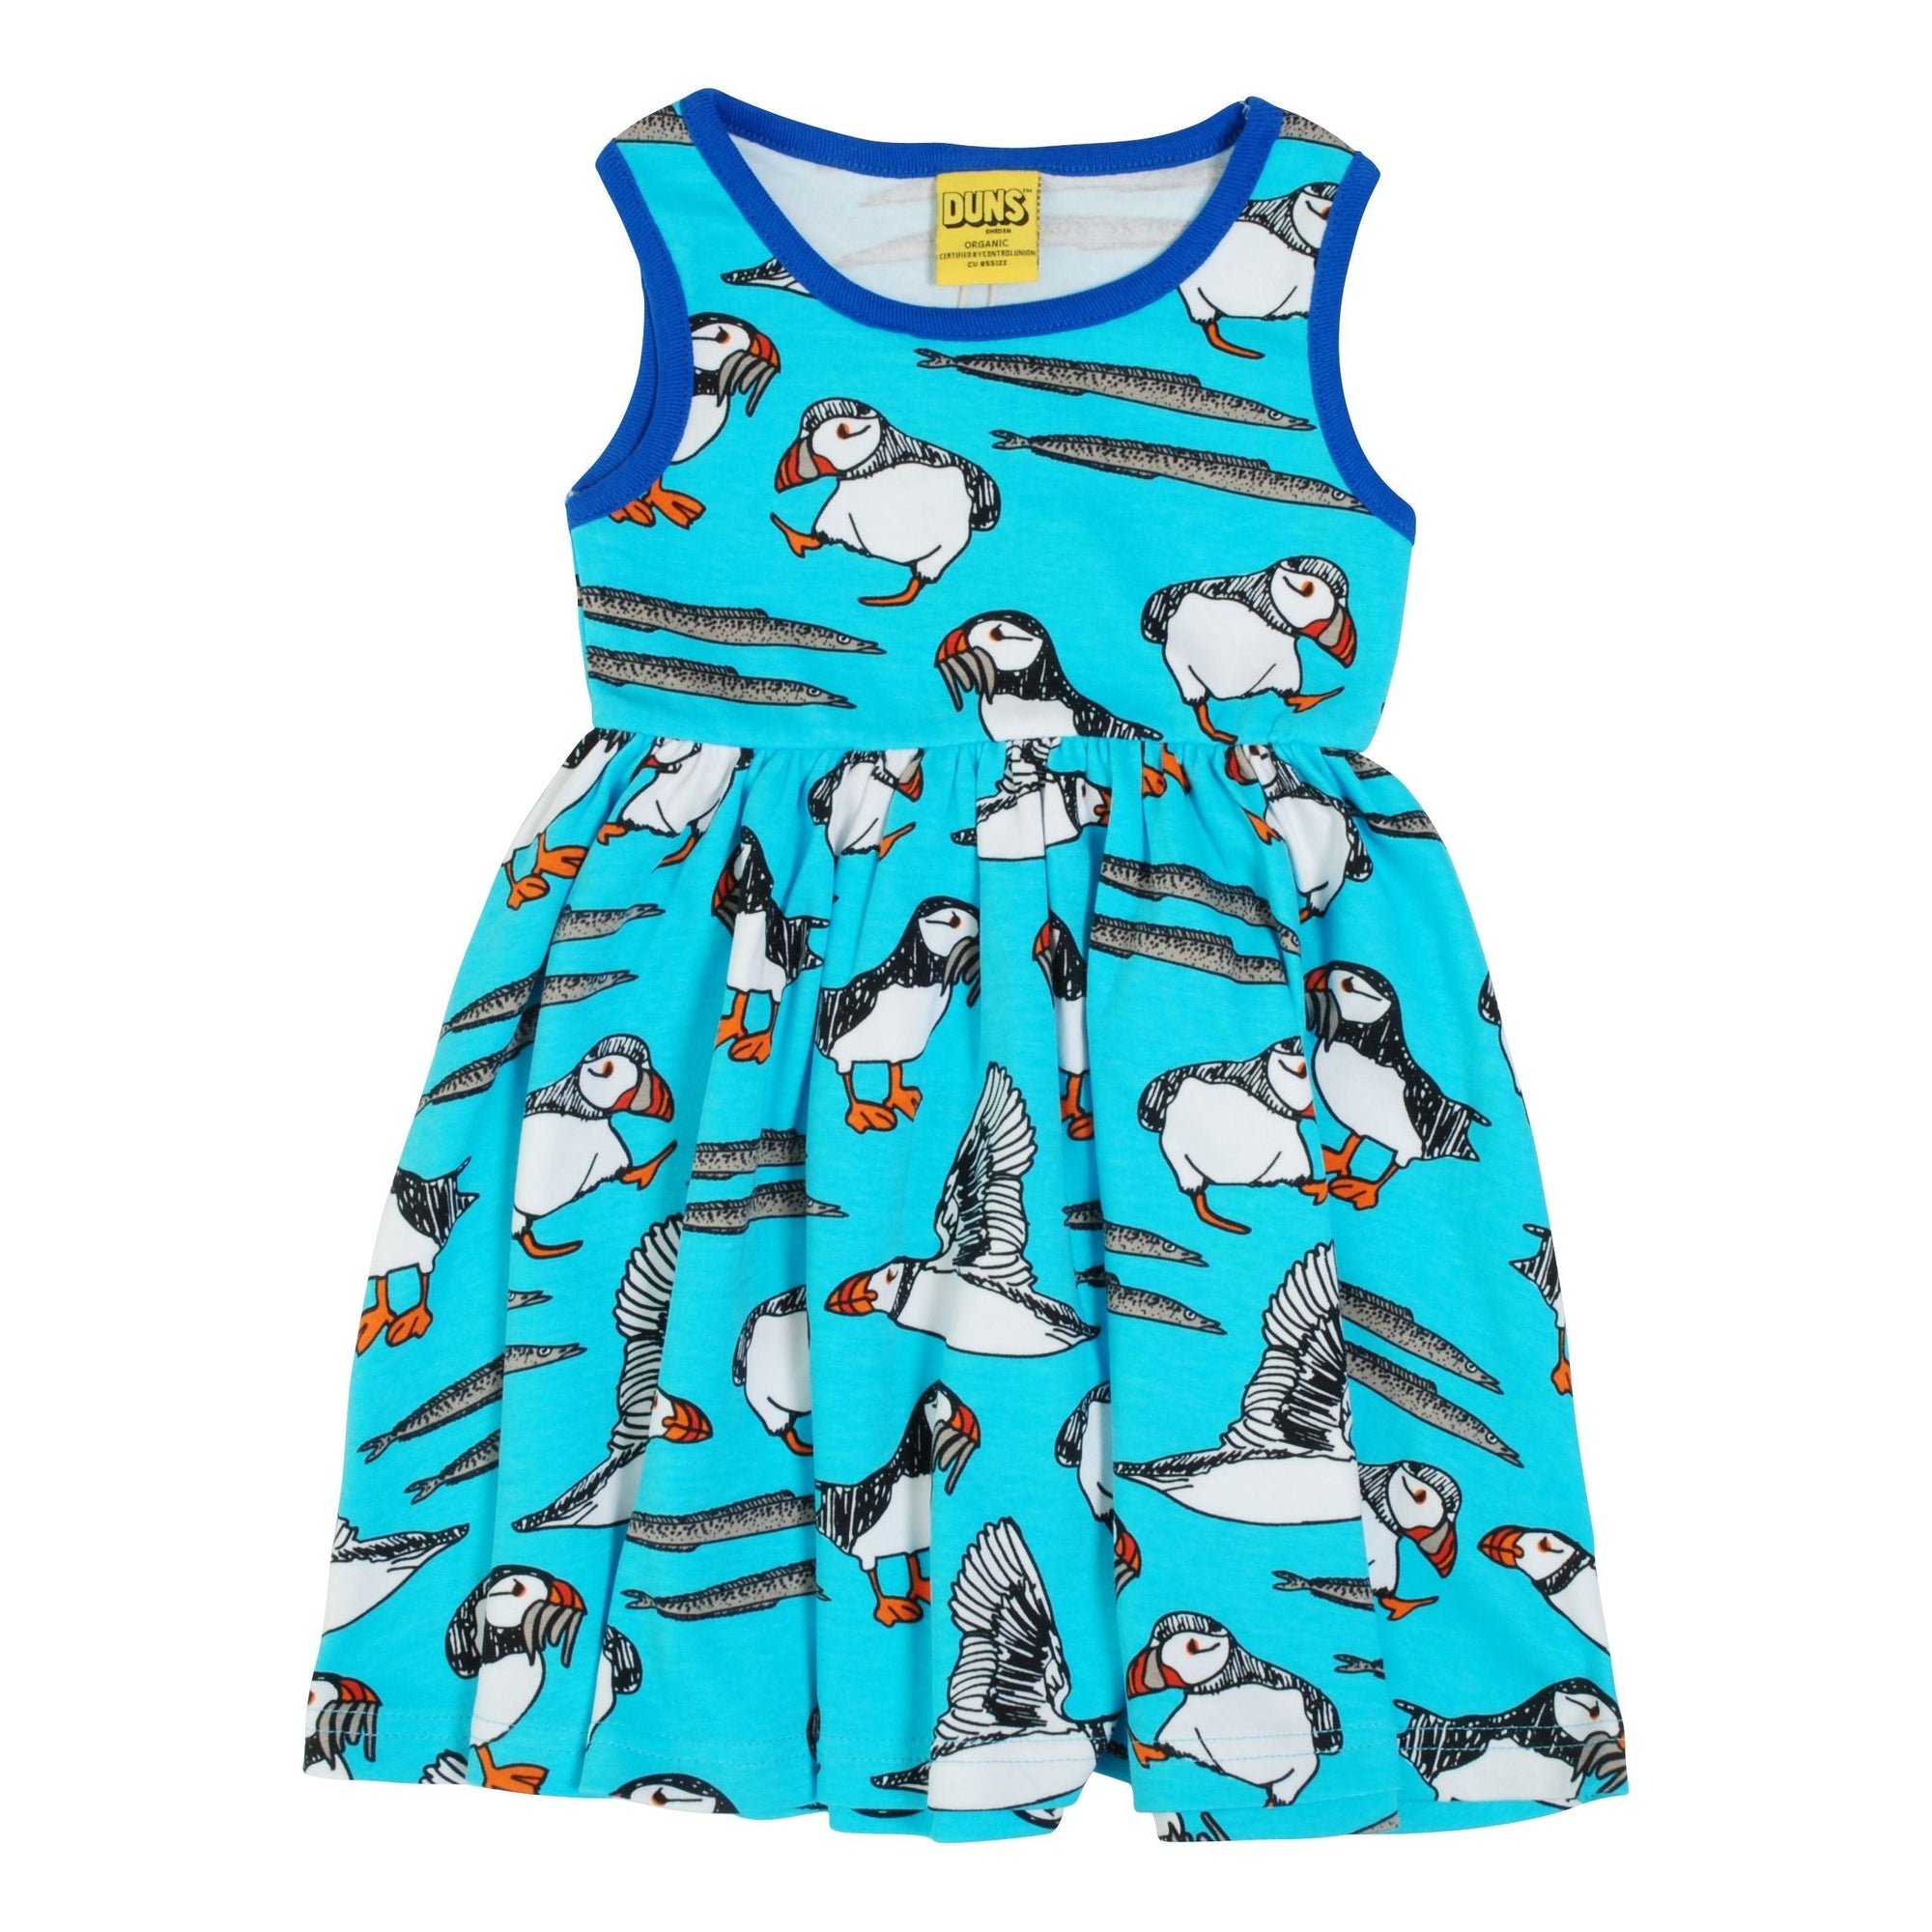 Puffins - Blue Atoll Sleeveless Dress With Gathered Skirt - 2 Left Size 11-12 & 12-13 years-Duns Sweden-Modern Rascals